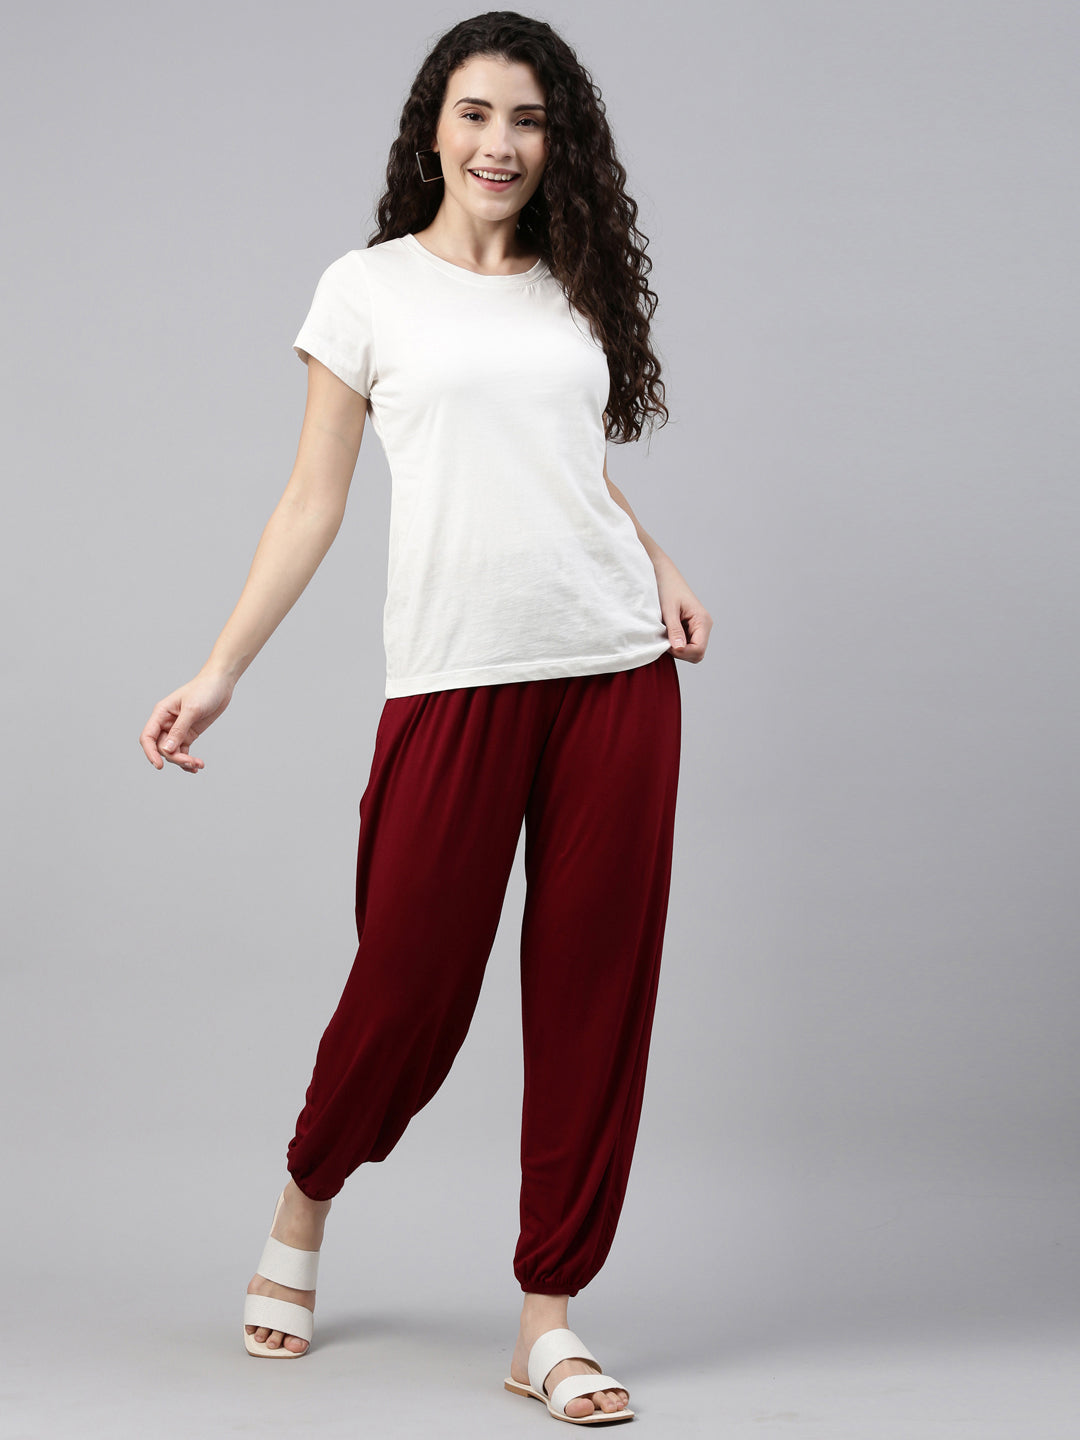 Buy Online Teal Viscose Polyester Jogger Pants for Women  Girls at Best  Prices in Biba IndiaATHLEI